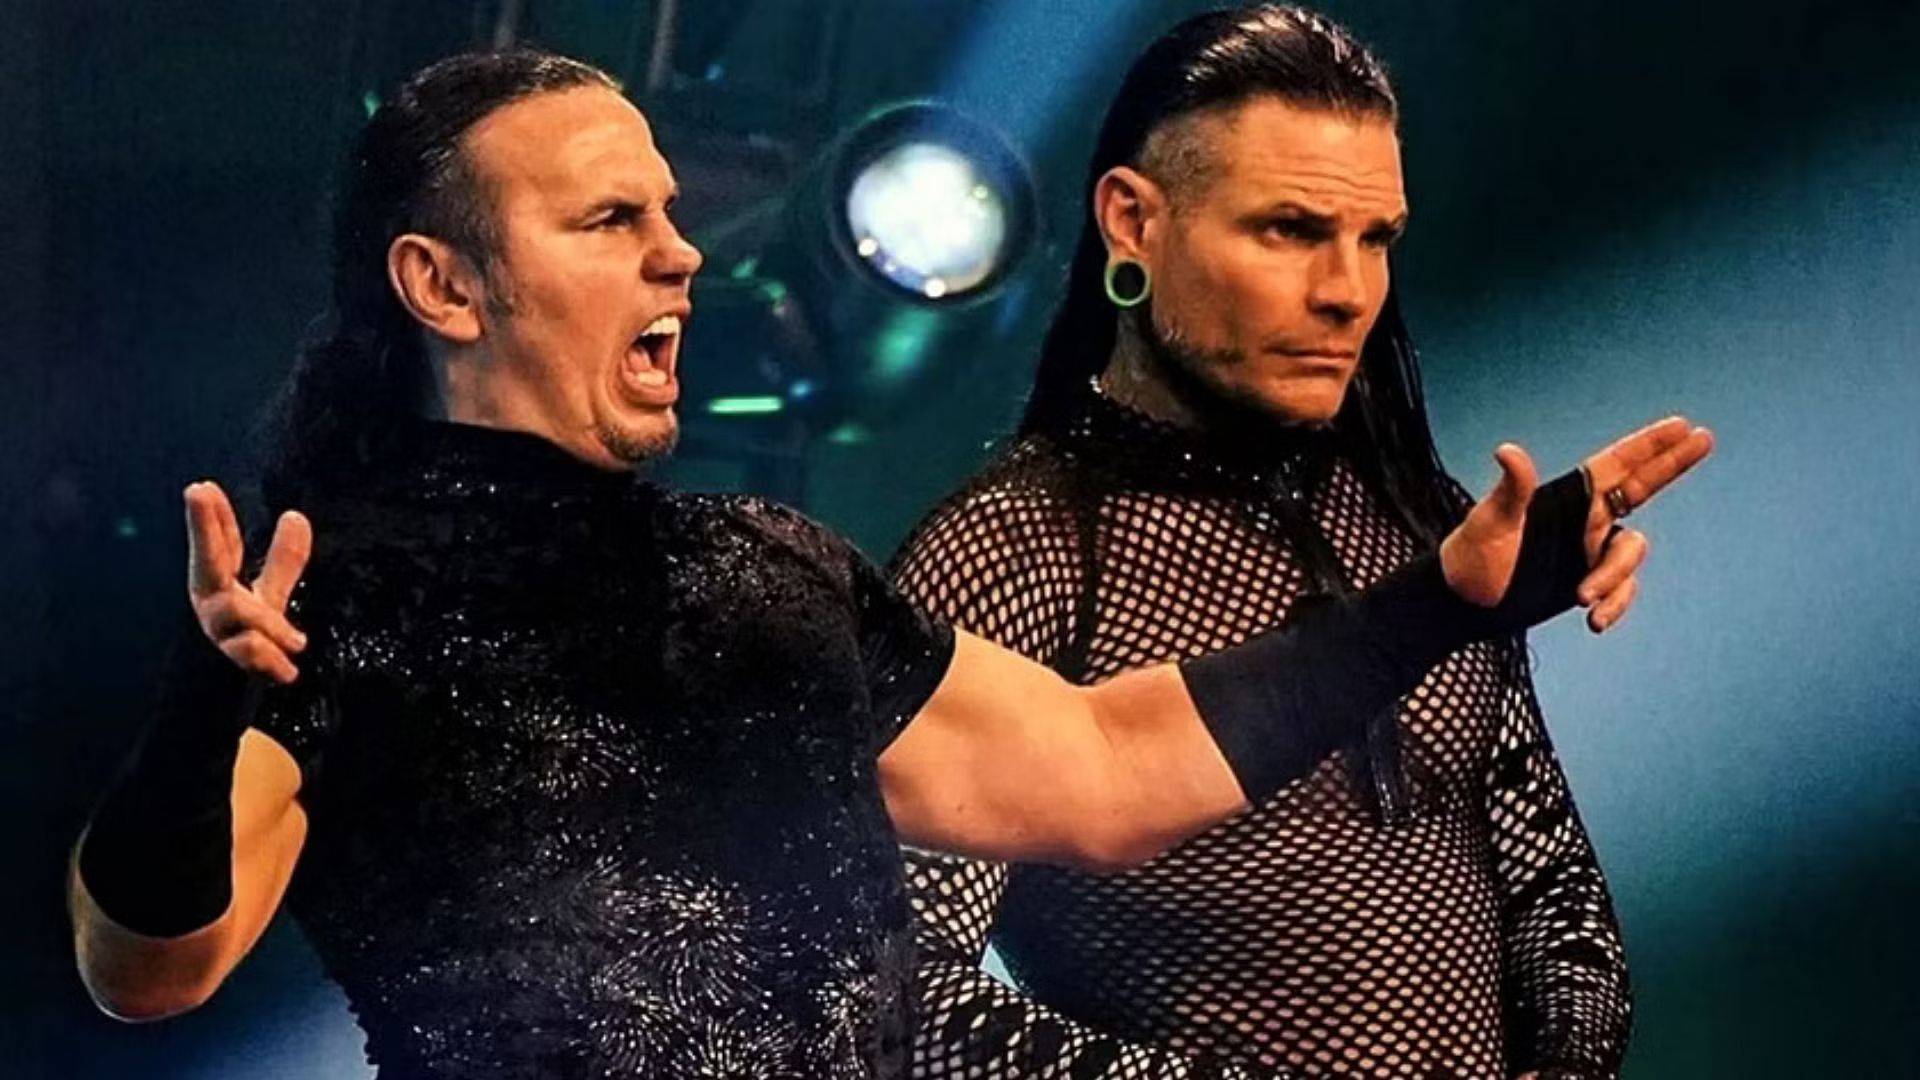 The Hardy Boyz are one of the greatest tag teams of all time.